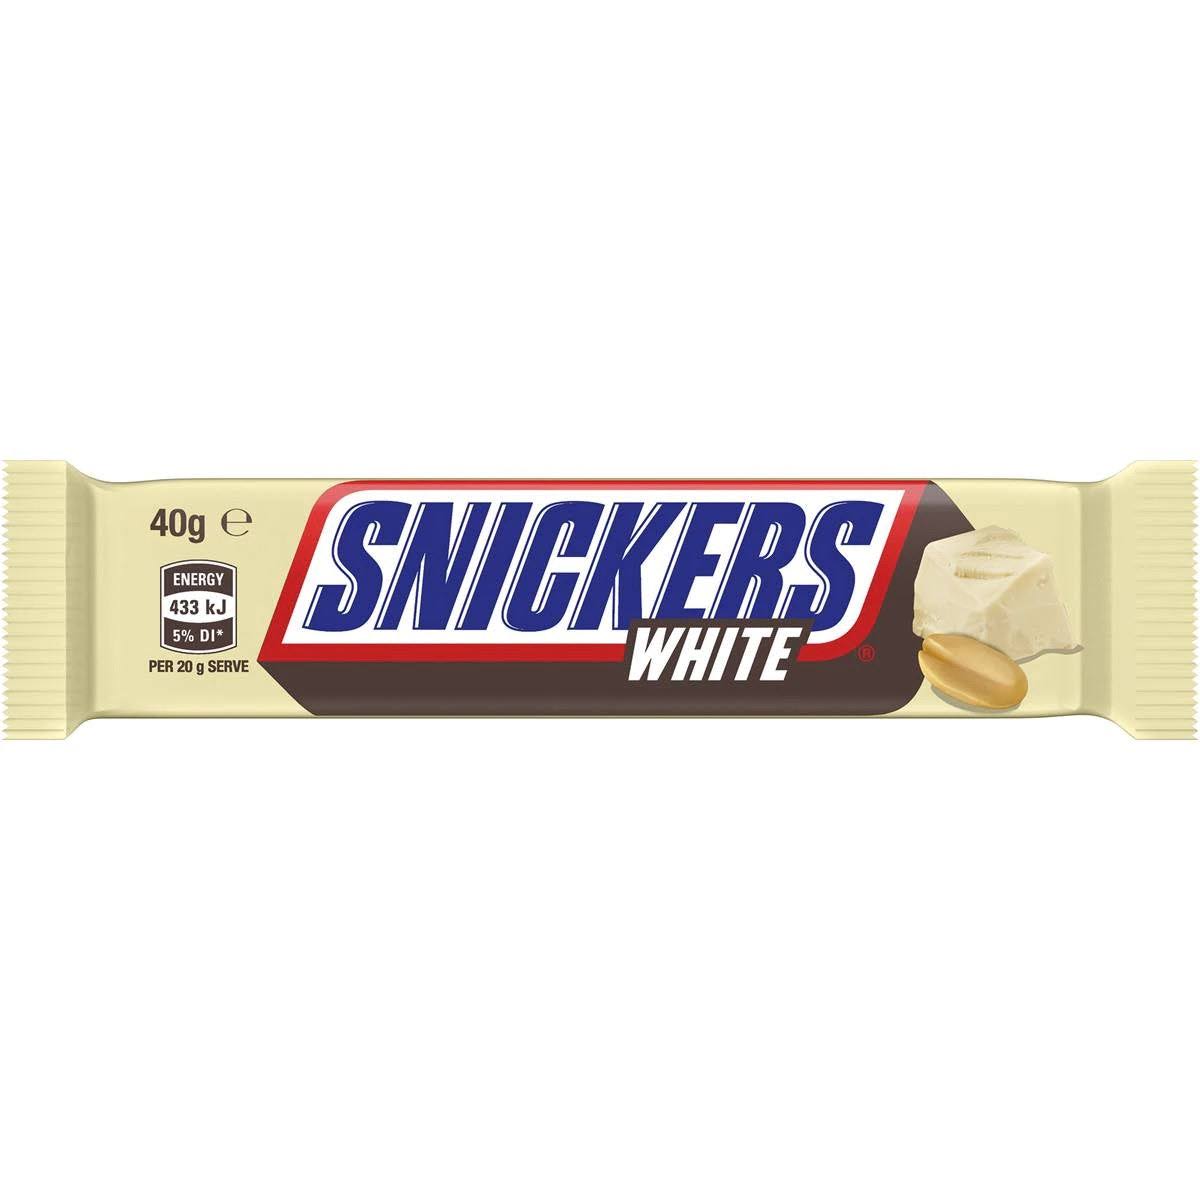 Snickers White Chocolate 40g